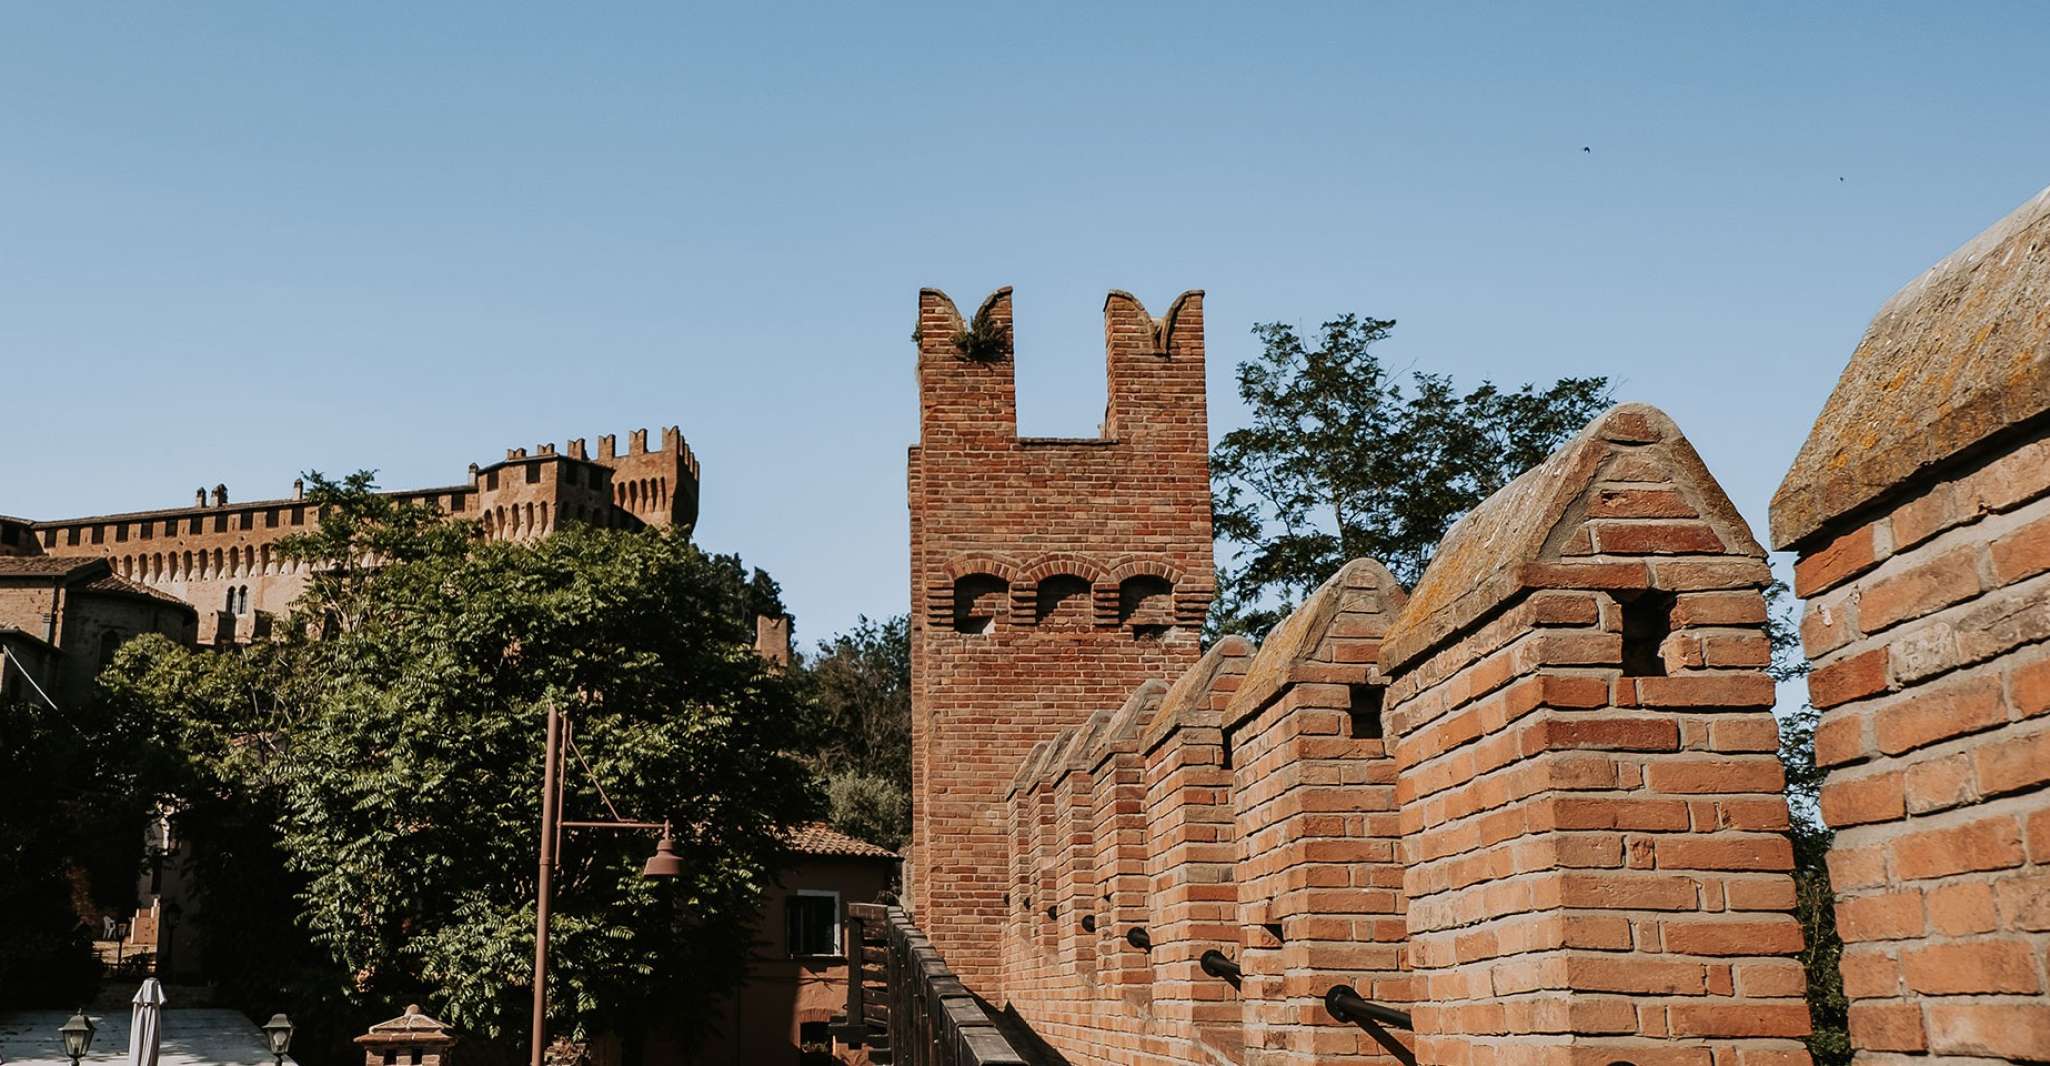 Gradara, Entry Ticket to The Gradara Castle and Guided Tour - Housity